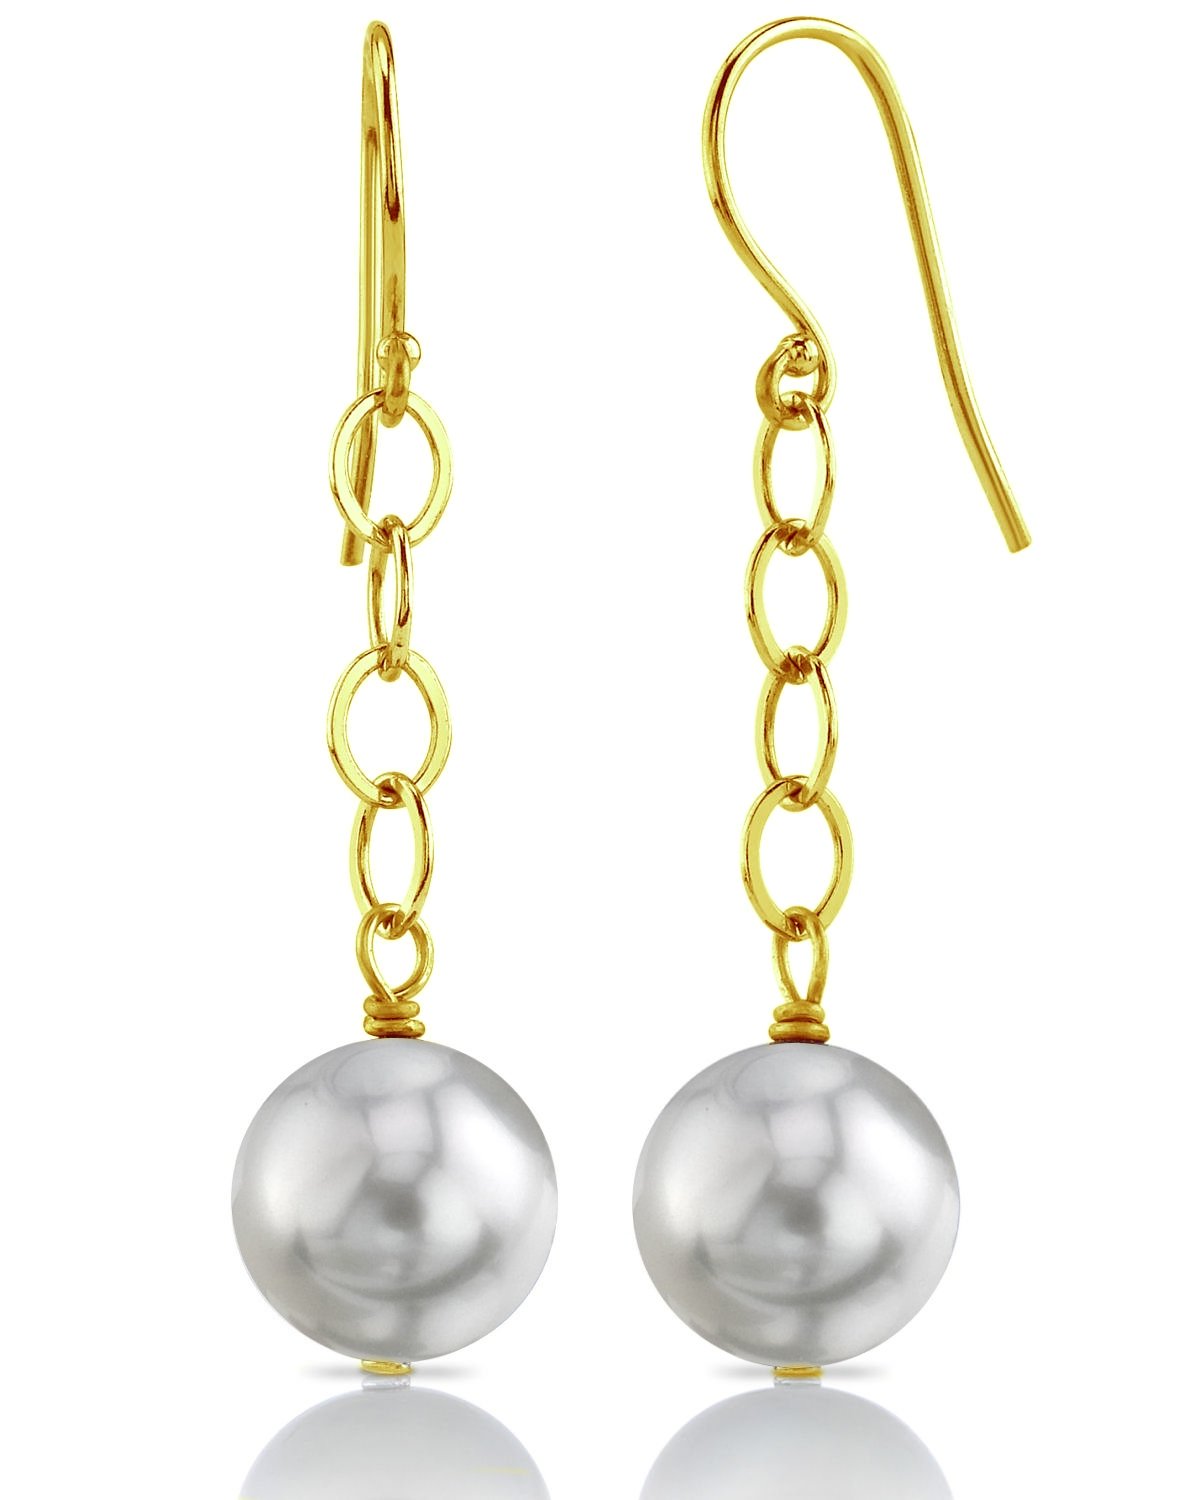 14K Gold 8.5-9.0mm Japanese Akoya Round Pearl Dangling Tincup